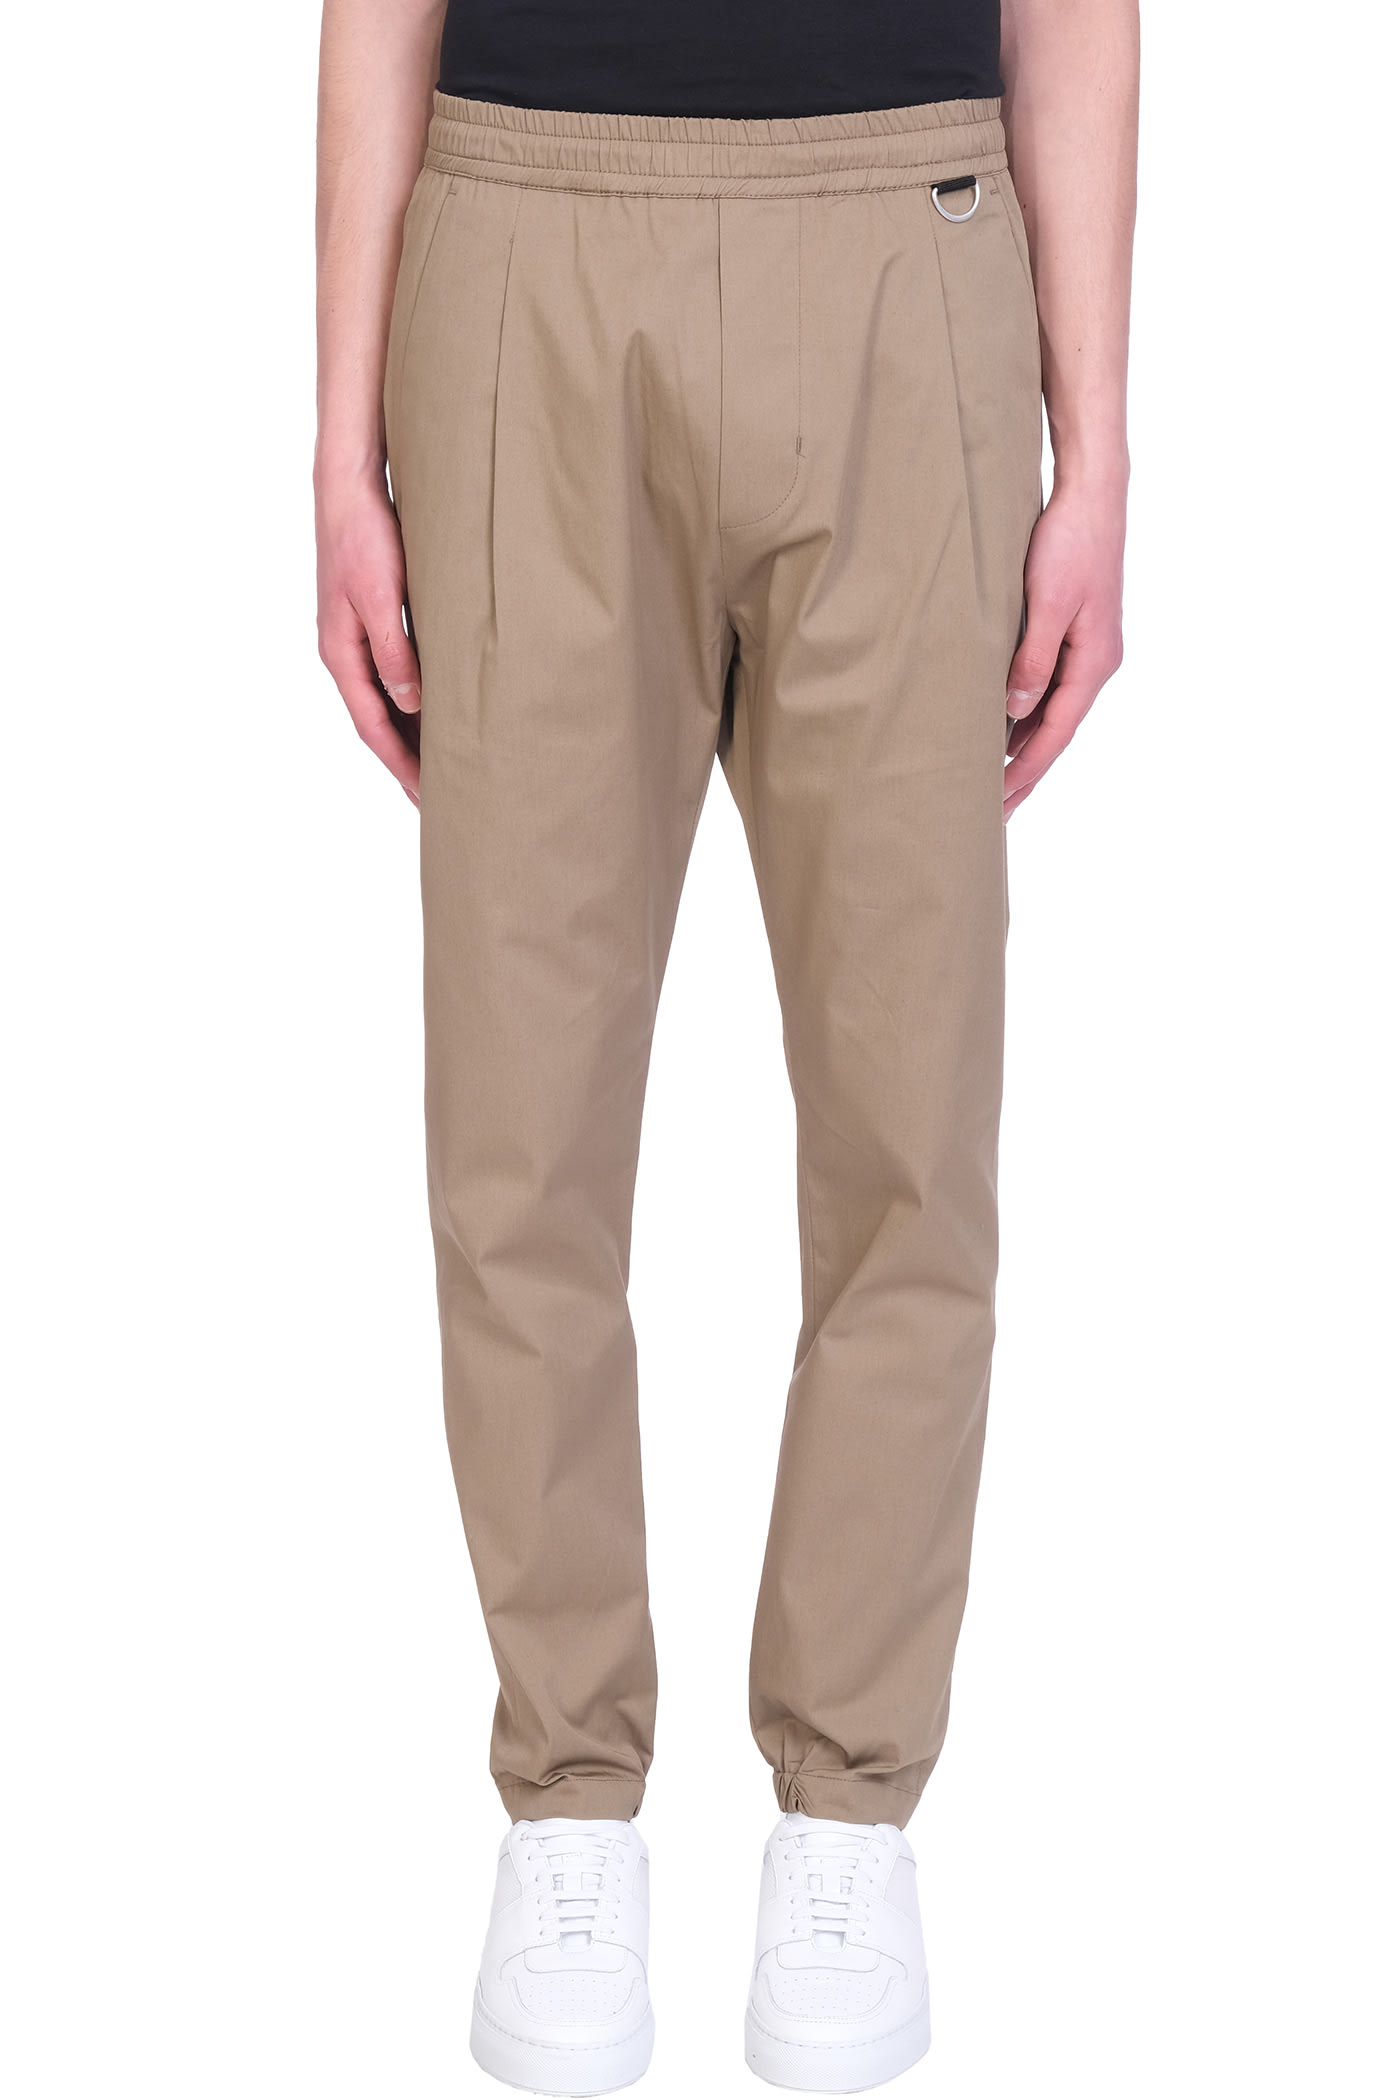 Low Brand Tokyo Lux Pants In Taupe Cotton